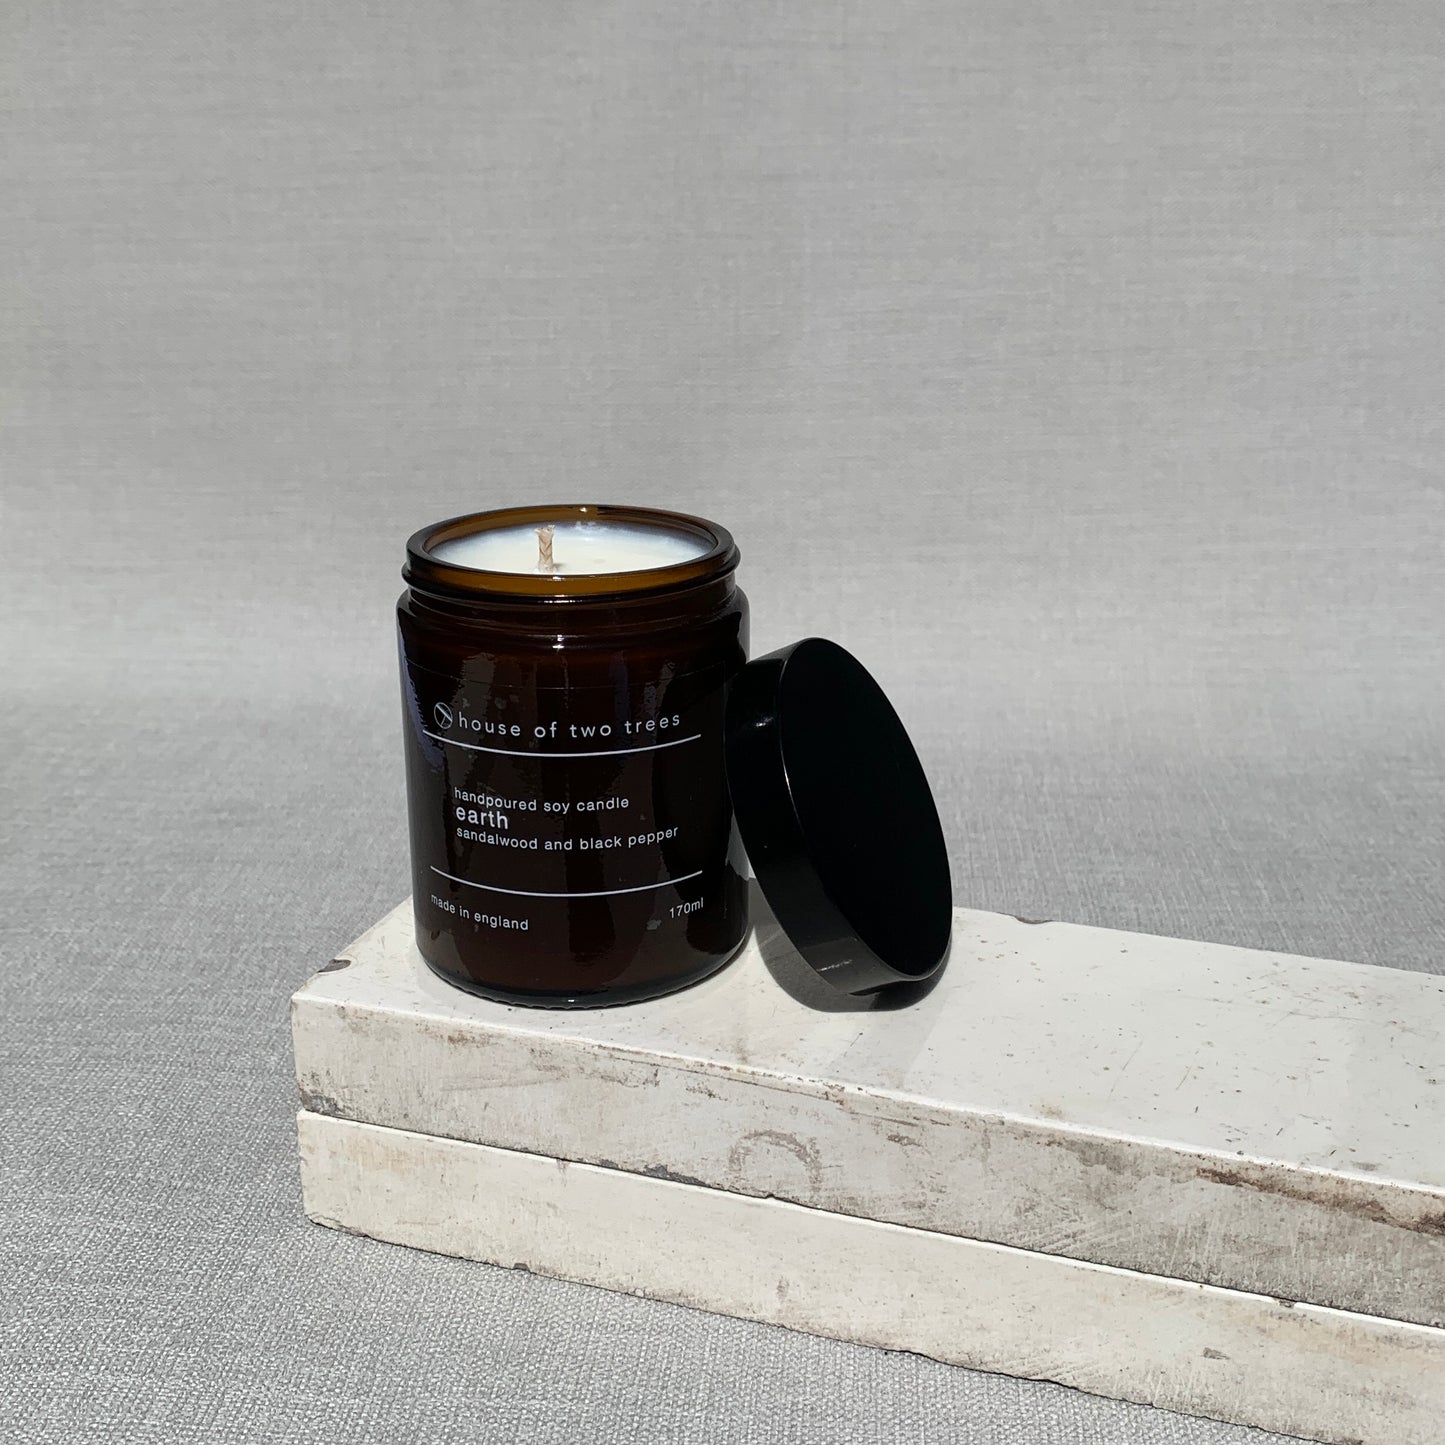 earth | sandalwood and black pepper | soy candle